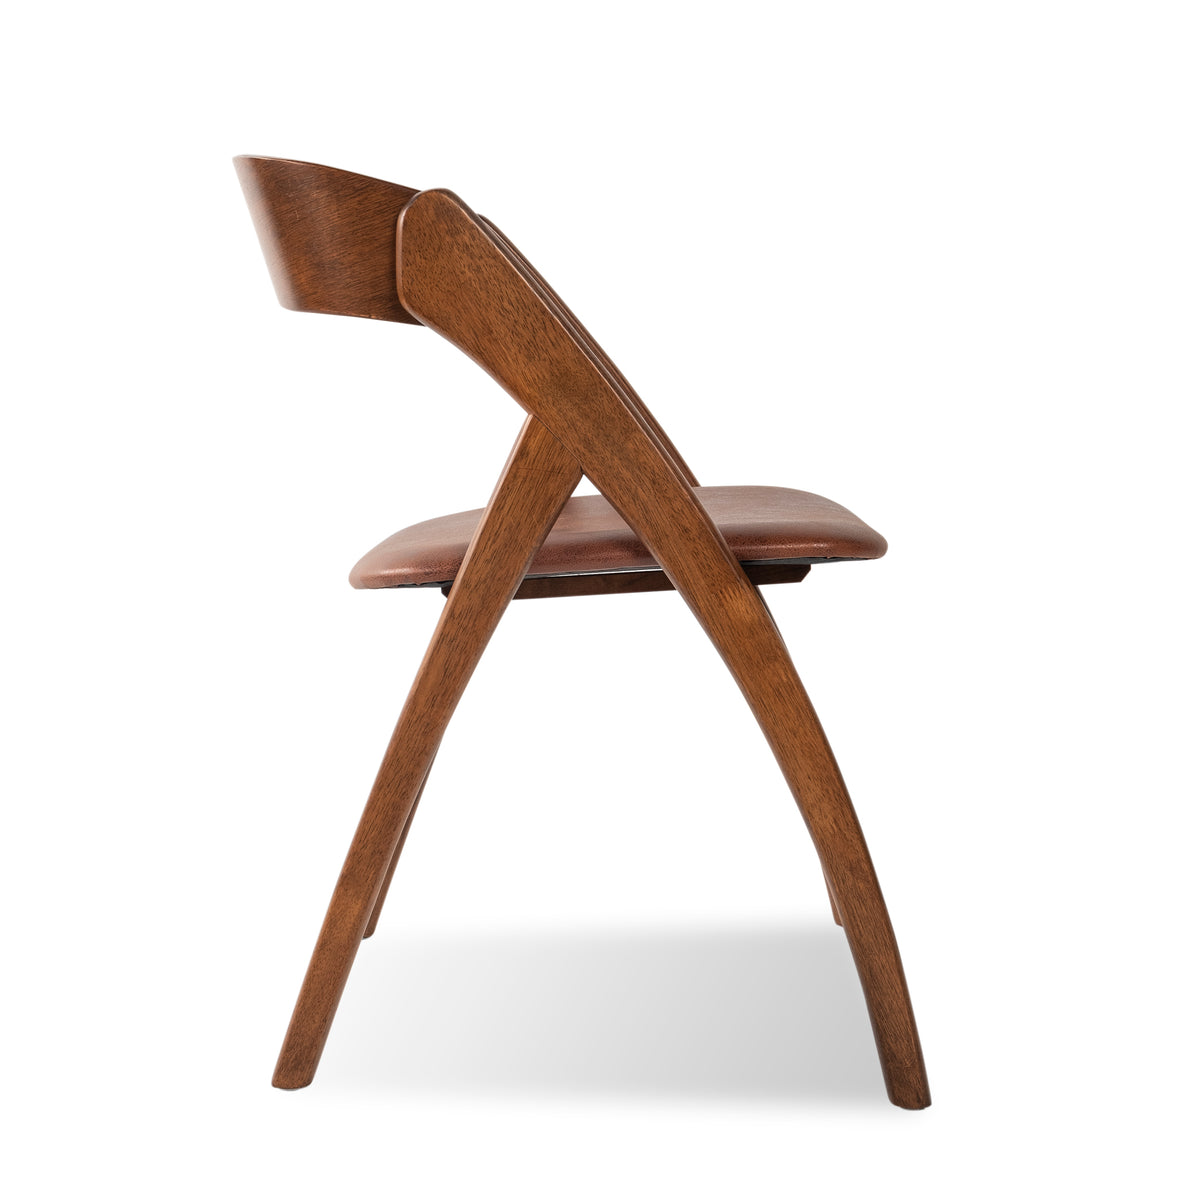 Amella Dining Chair